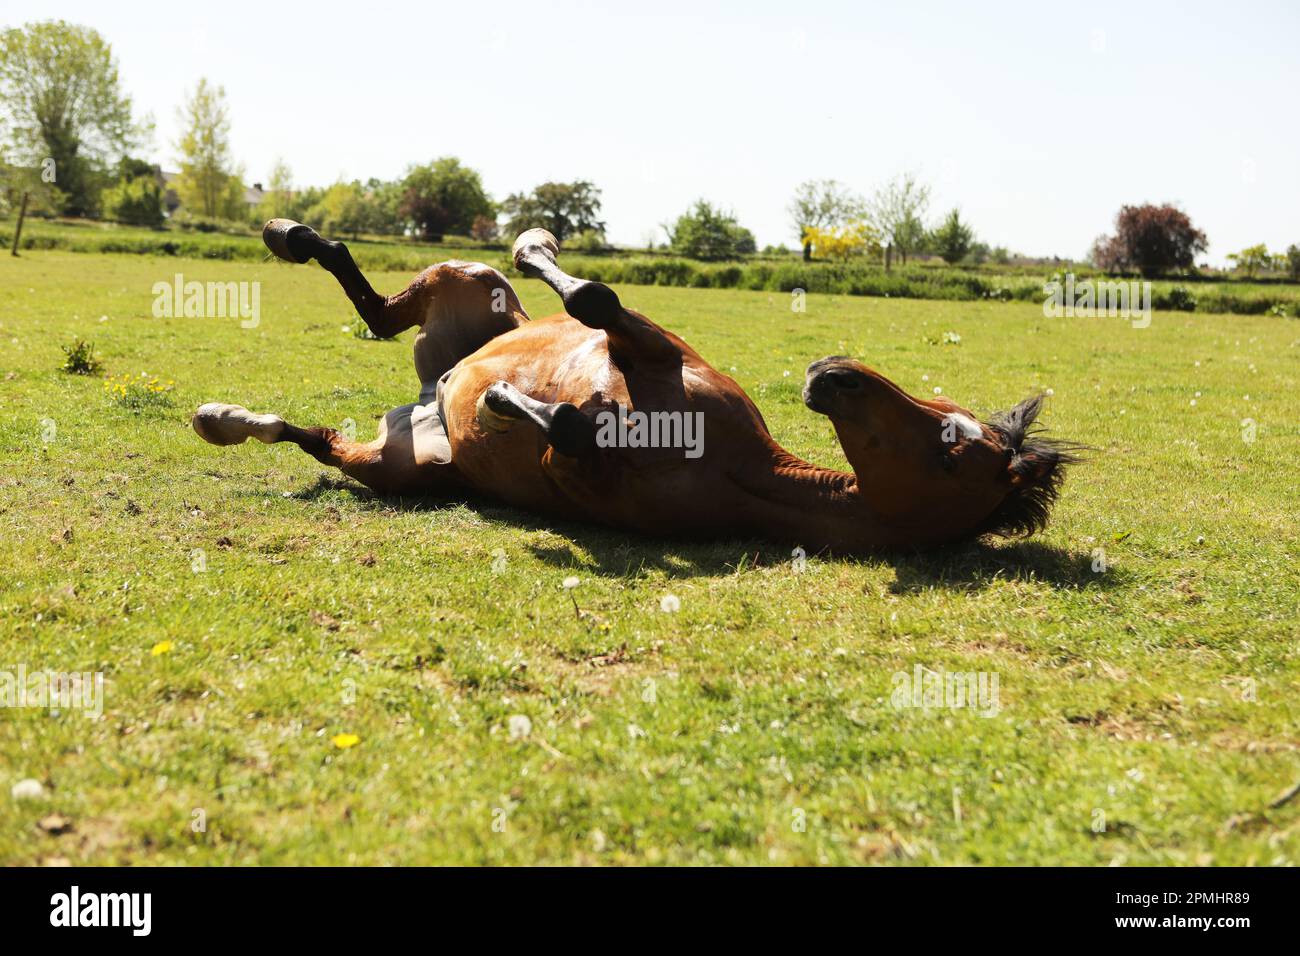 An Arabian horse rolling in the grass in summertime Stock Photo